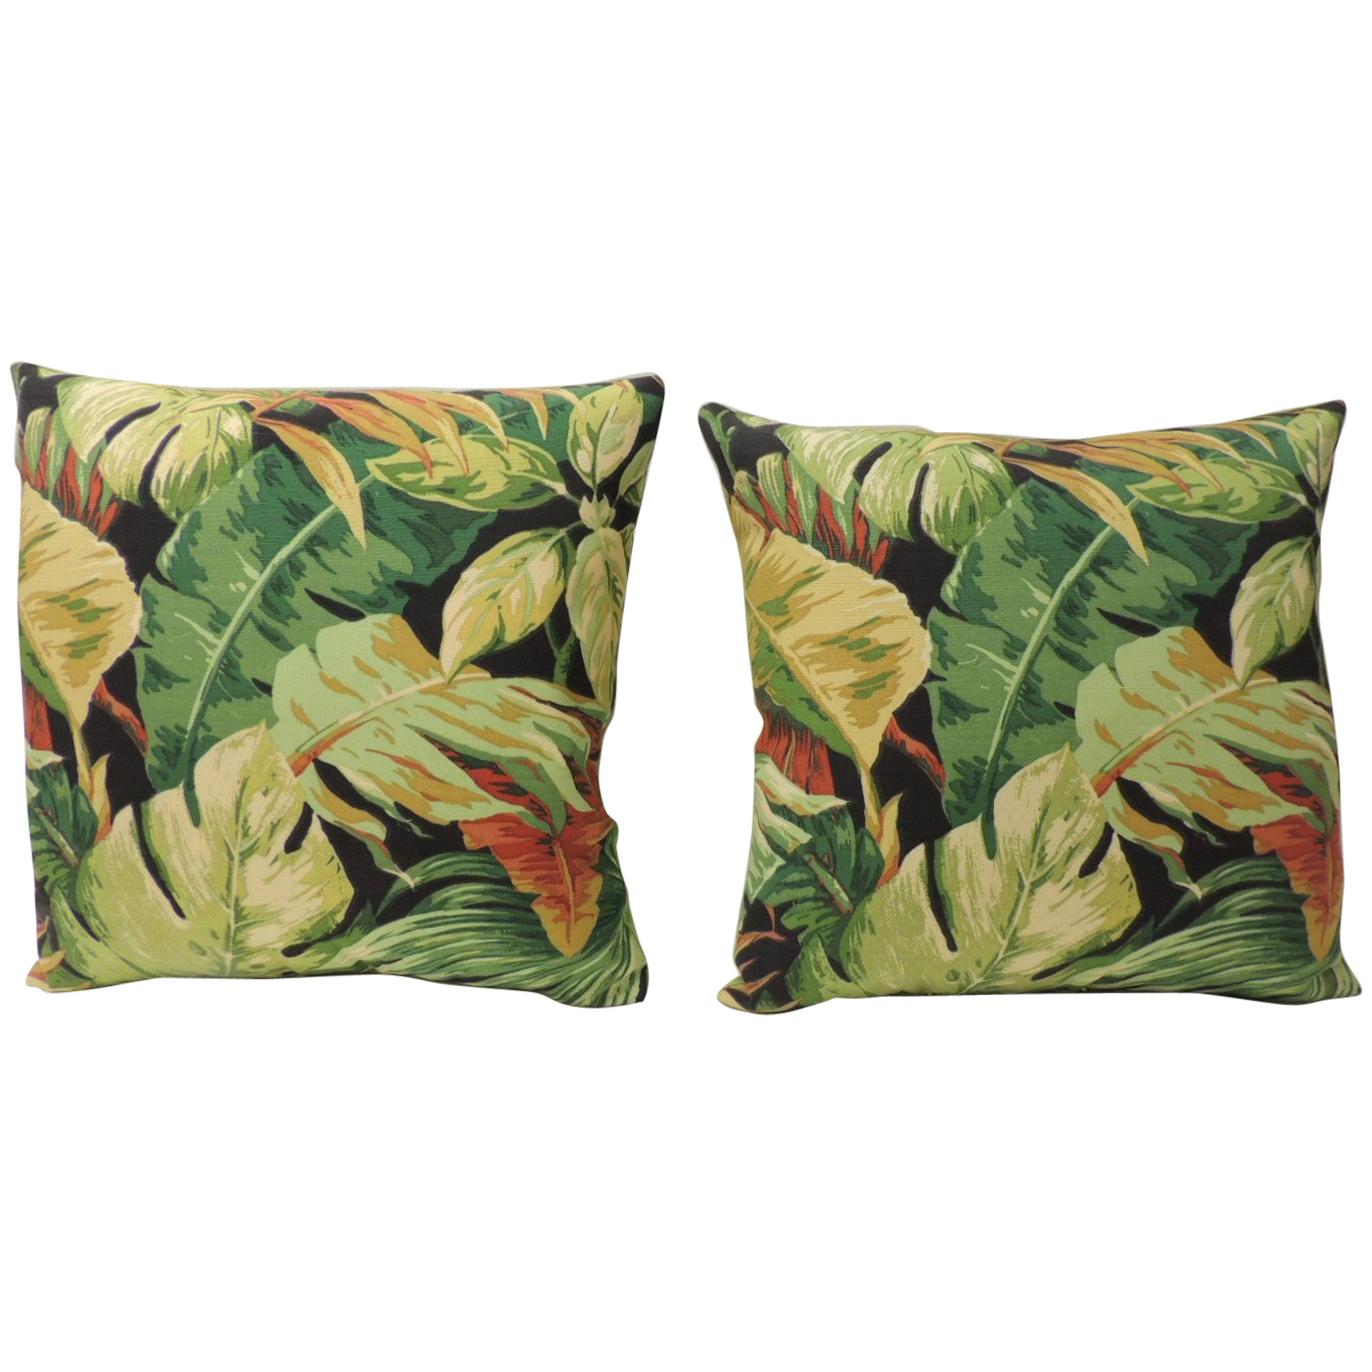 Pair of Green and Yellow Tropical Leaf Bark Cloth Decorative Pillows